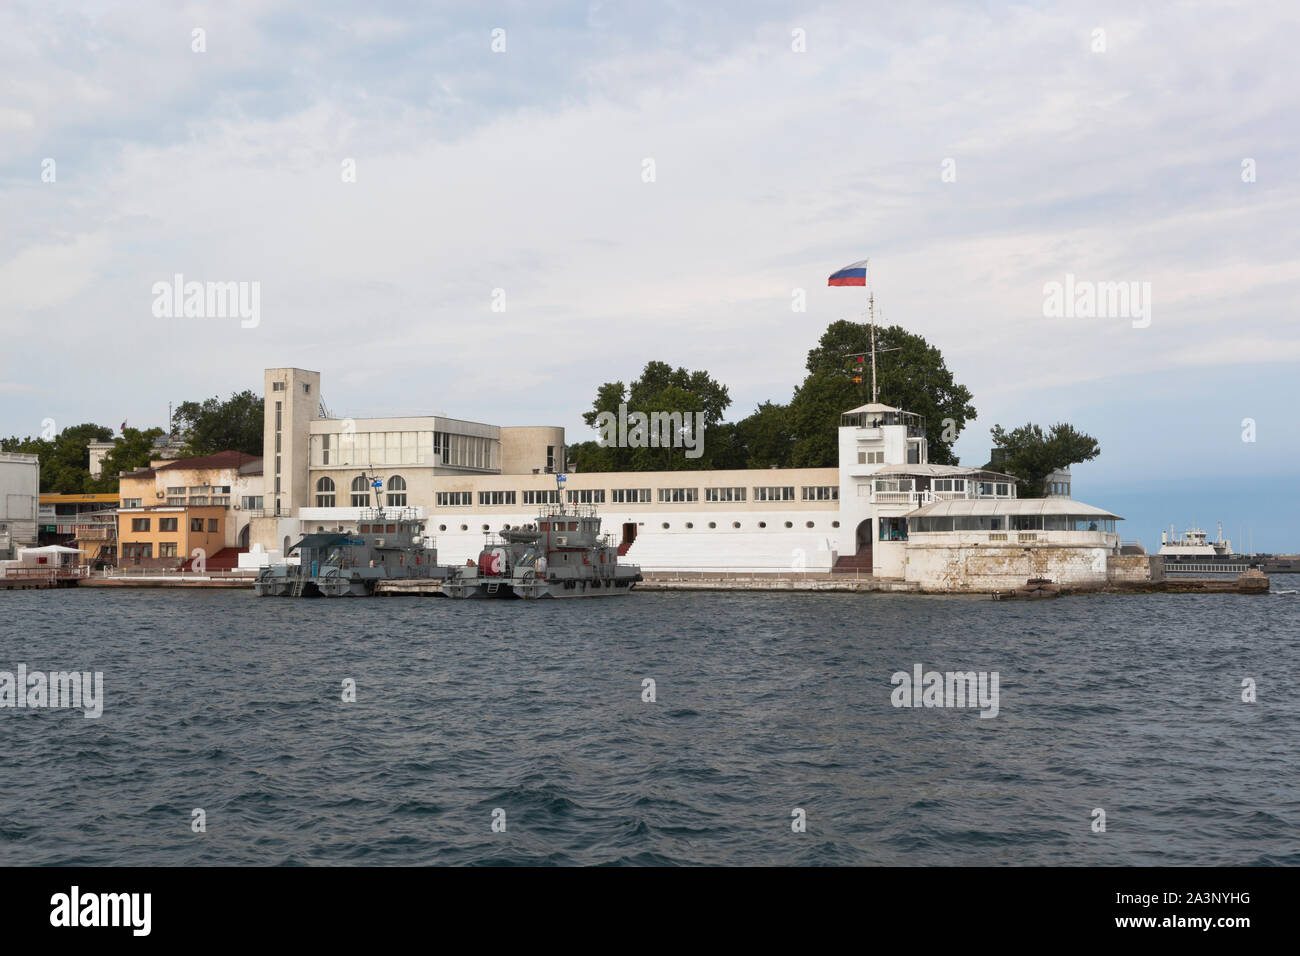 Sevastopol, Crimea, Russia - July 24, 2019: View from the sea to the building of the Water Station of the Red Banner Black Sea Fleet on the Nikolaev C Stock Photo